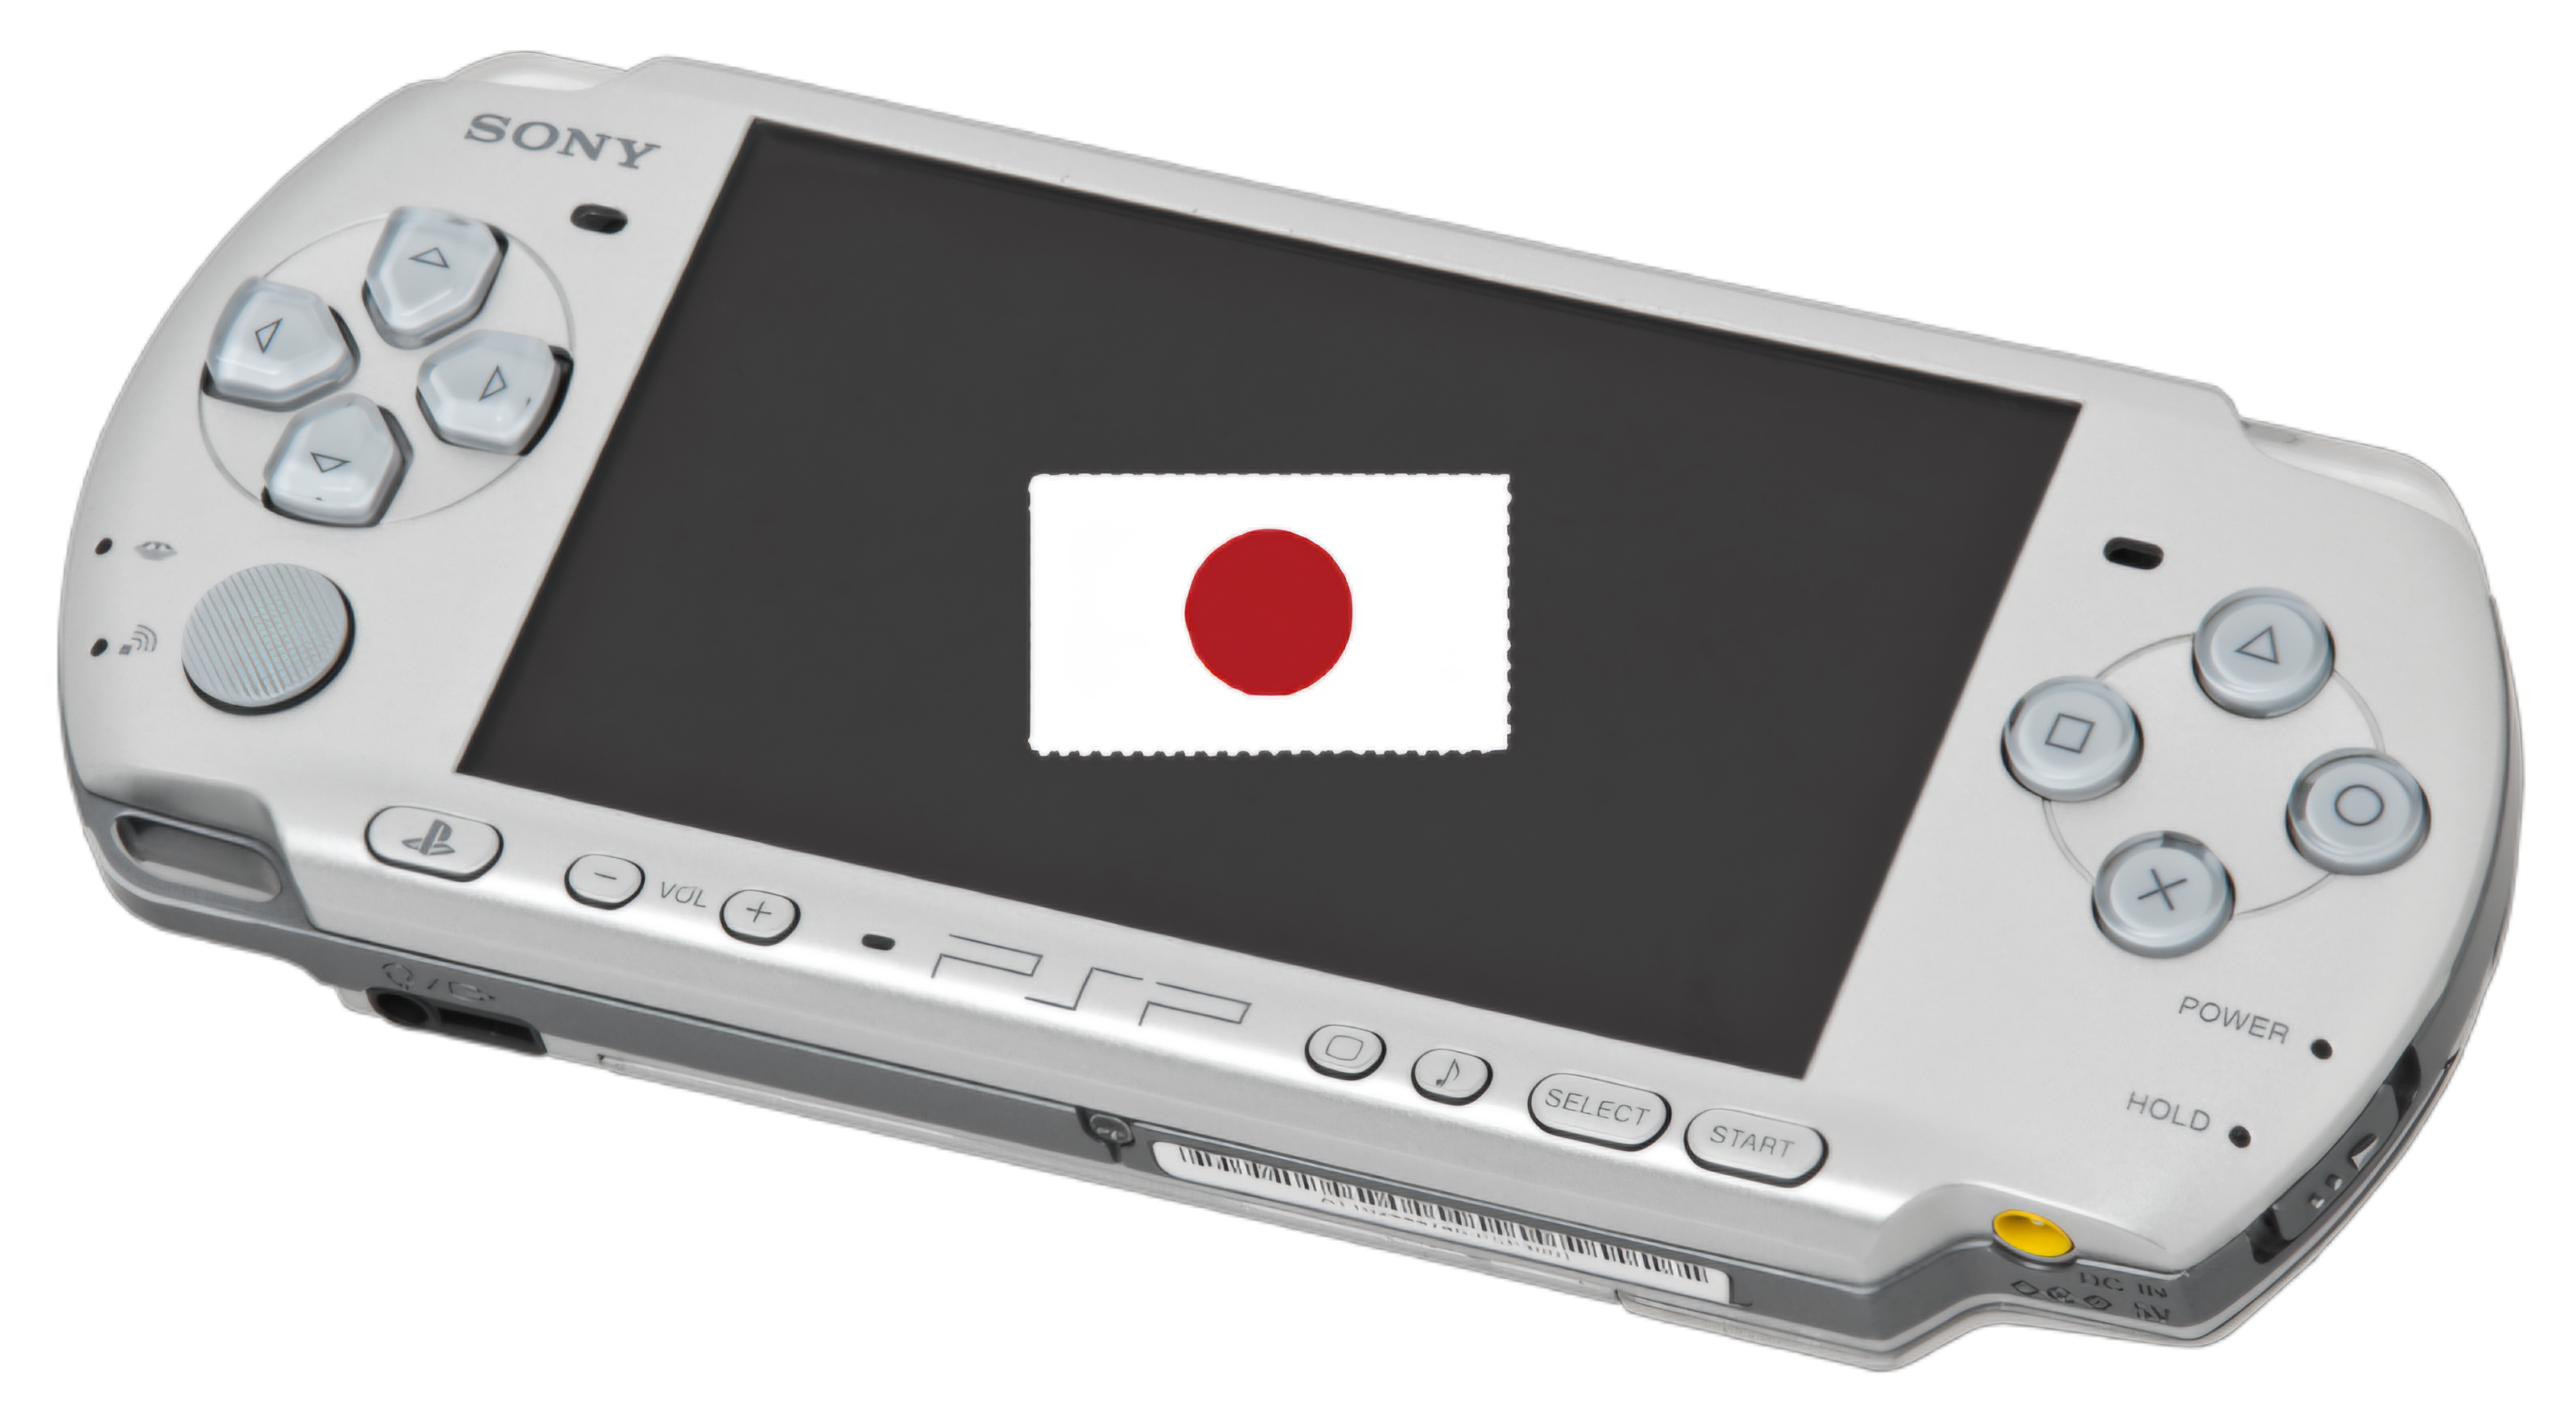 PlayStation Portable Silver Model 3000 Handheld Console (Japanese)